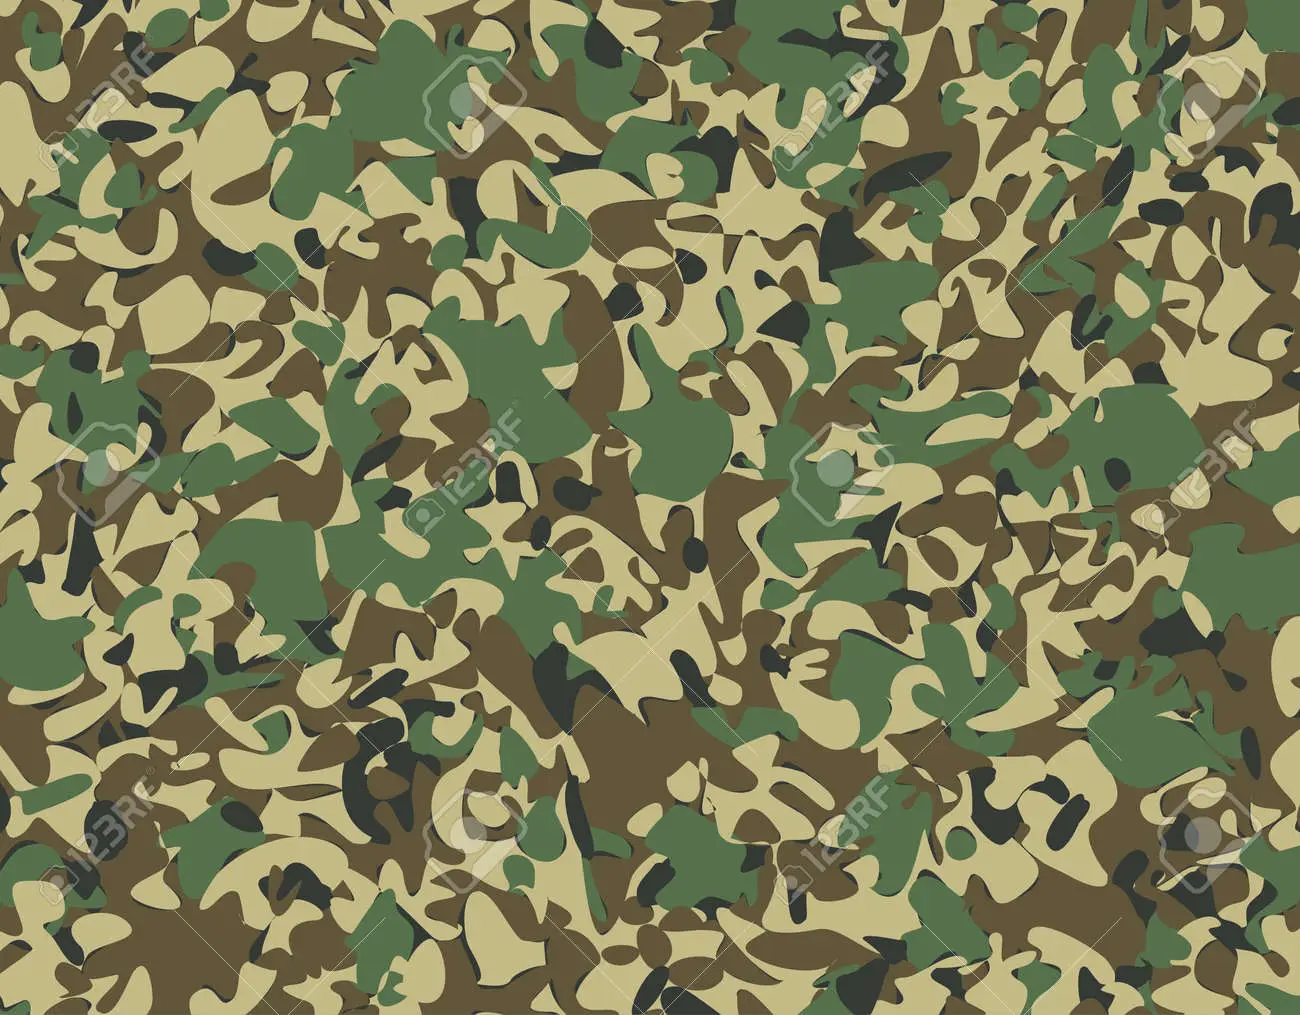 Abstract military camouflage background made of splash camo pattern for army clothing royalty free svg cliparts vectors and stock illustration image